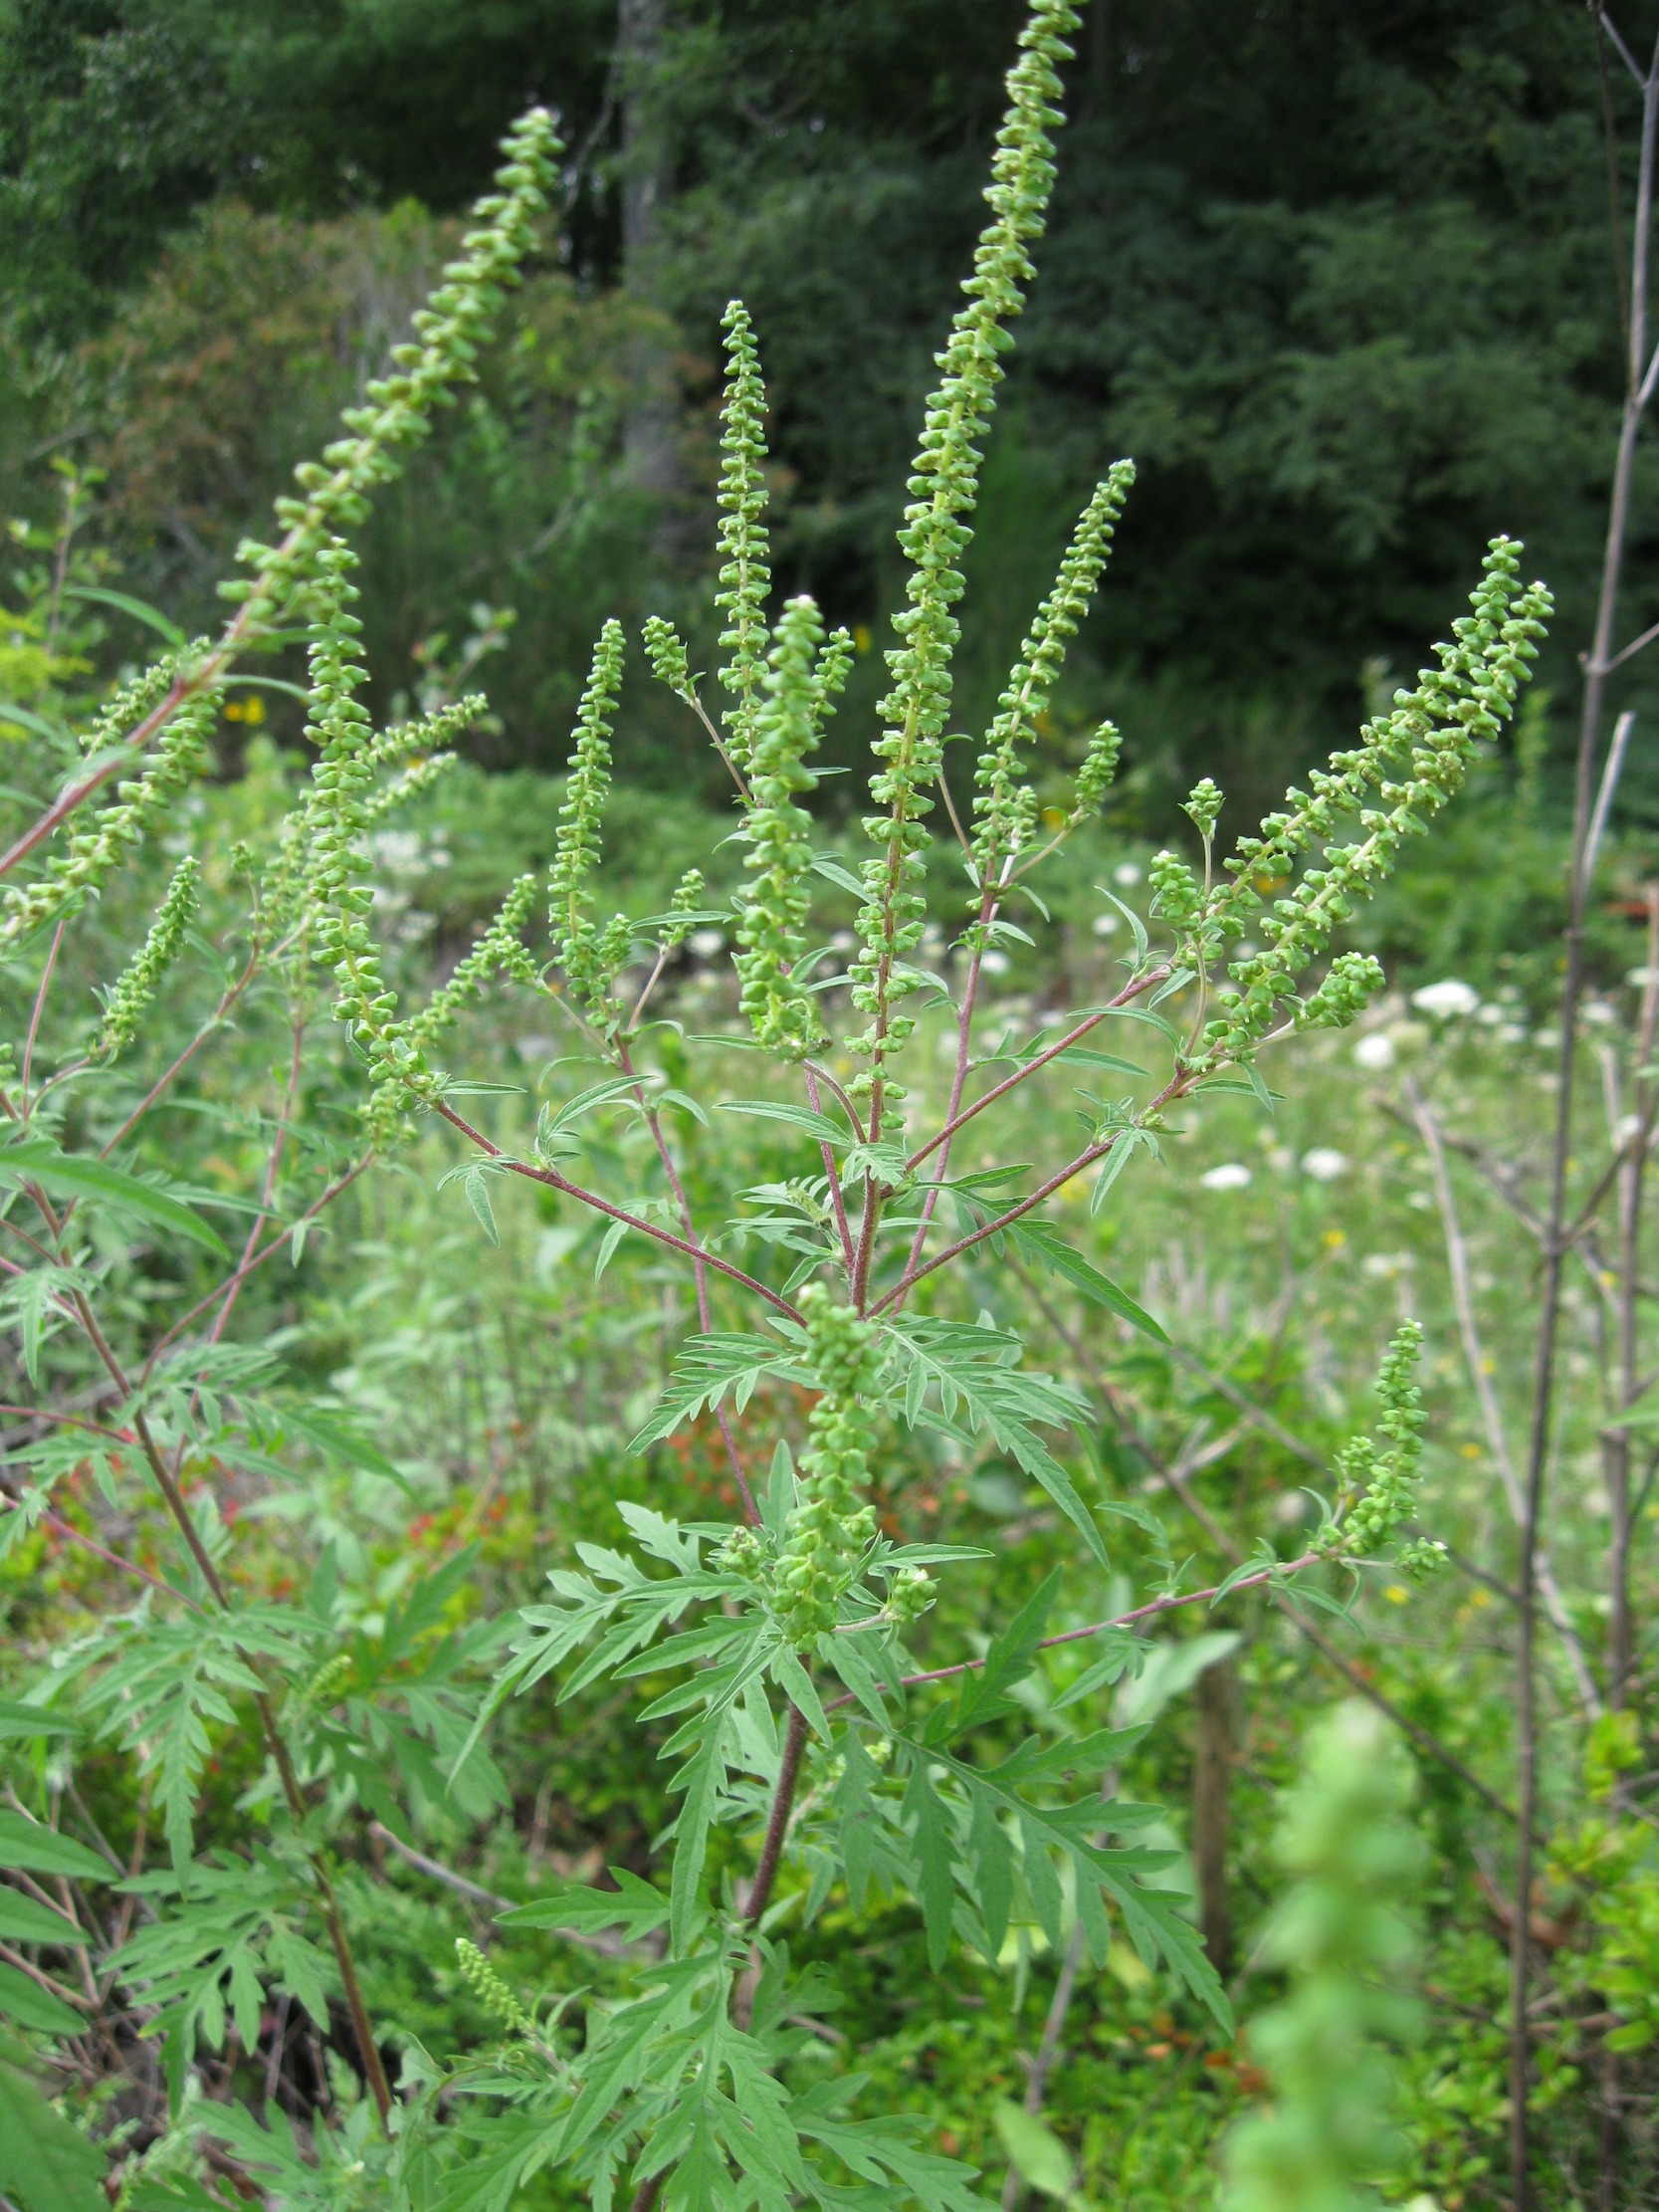 The Scientific Name is Ambrosia artemisiifolia. You will likely hear them called Common Ragweed, American Wormwood, Bitterweed, Carrotweed, Blackweed, Hay-fever Weed. This picture shows the Spikes of male flowers shed pollen causing great hayfever. of Ambrosia artemisiifolia